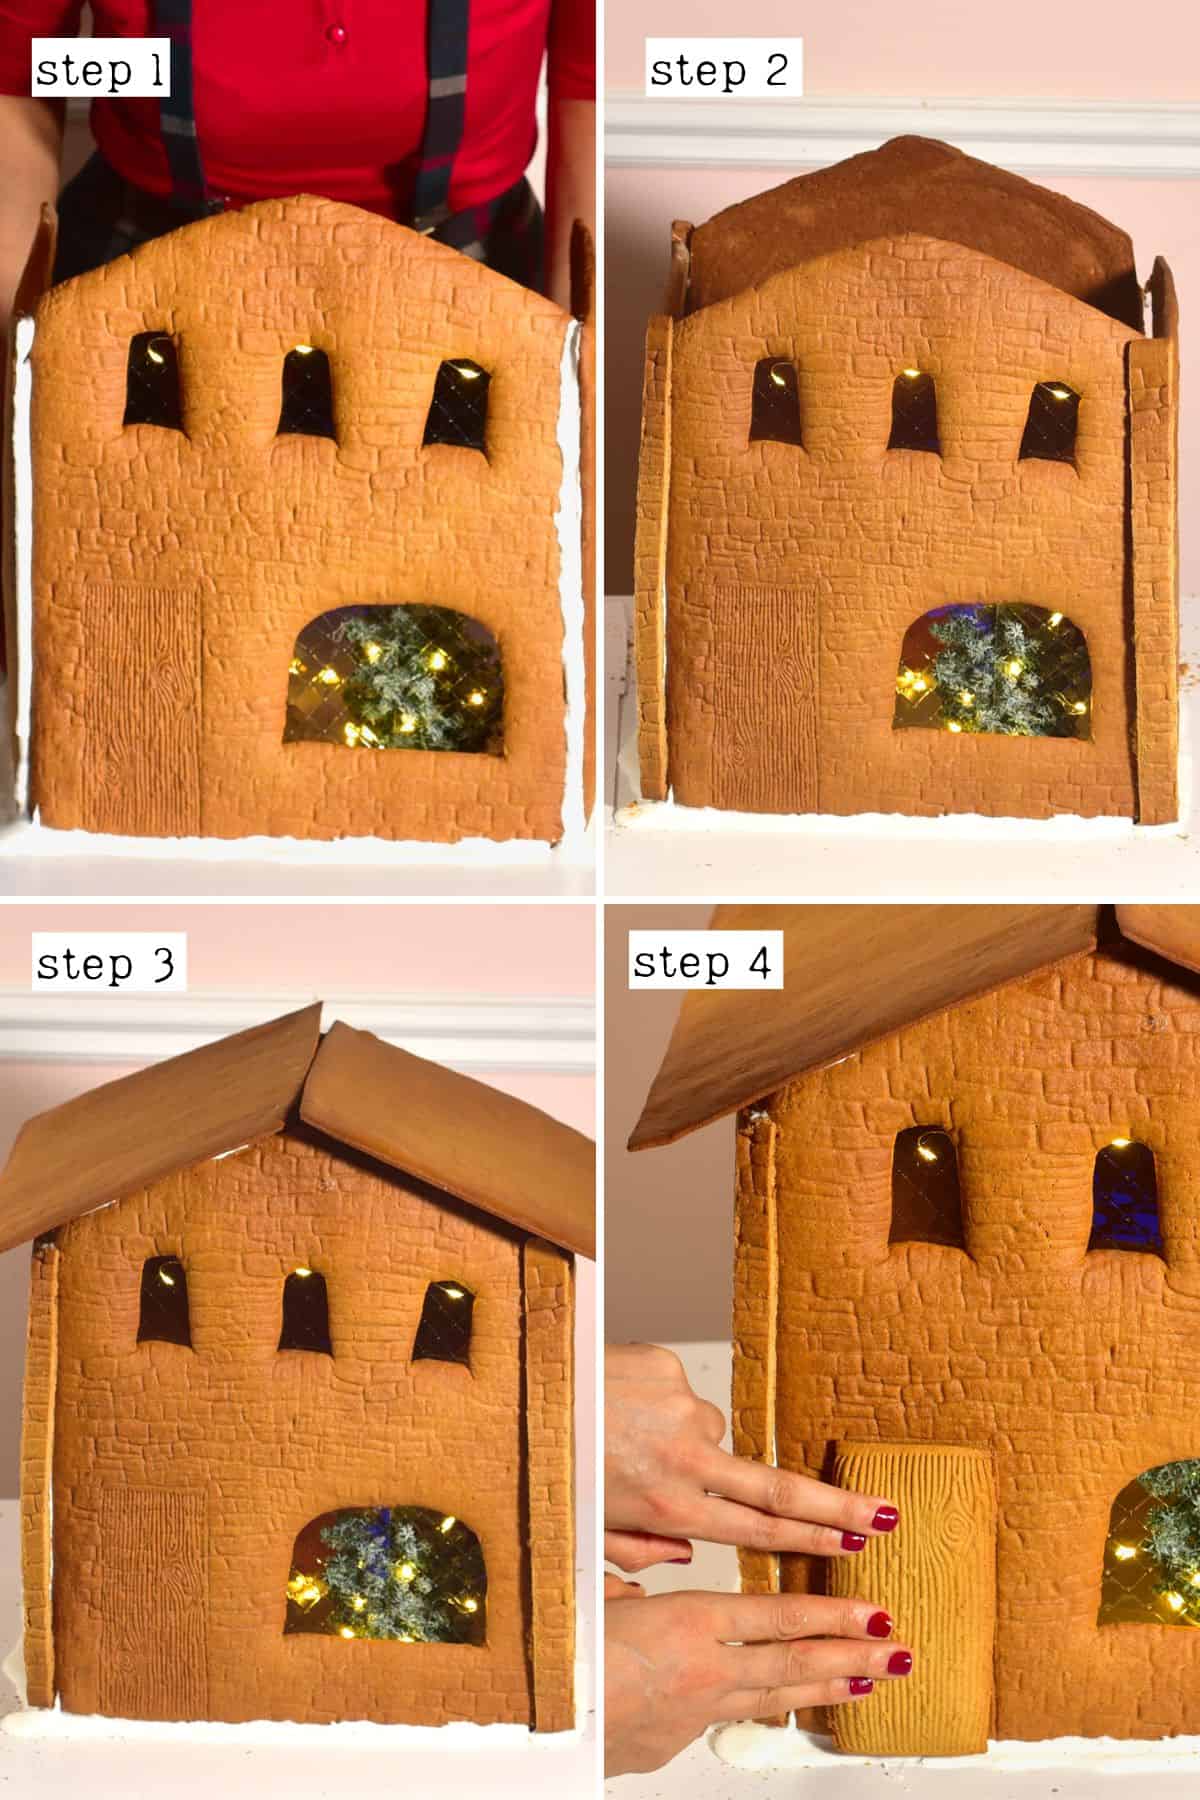 Steps for building a gingerbread house